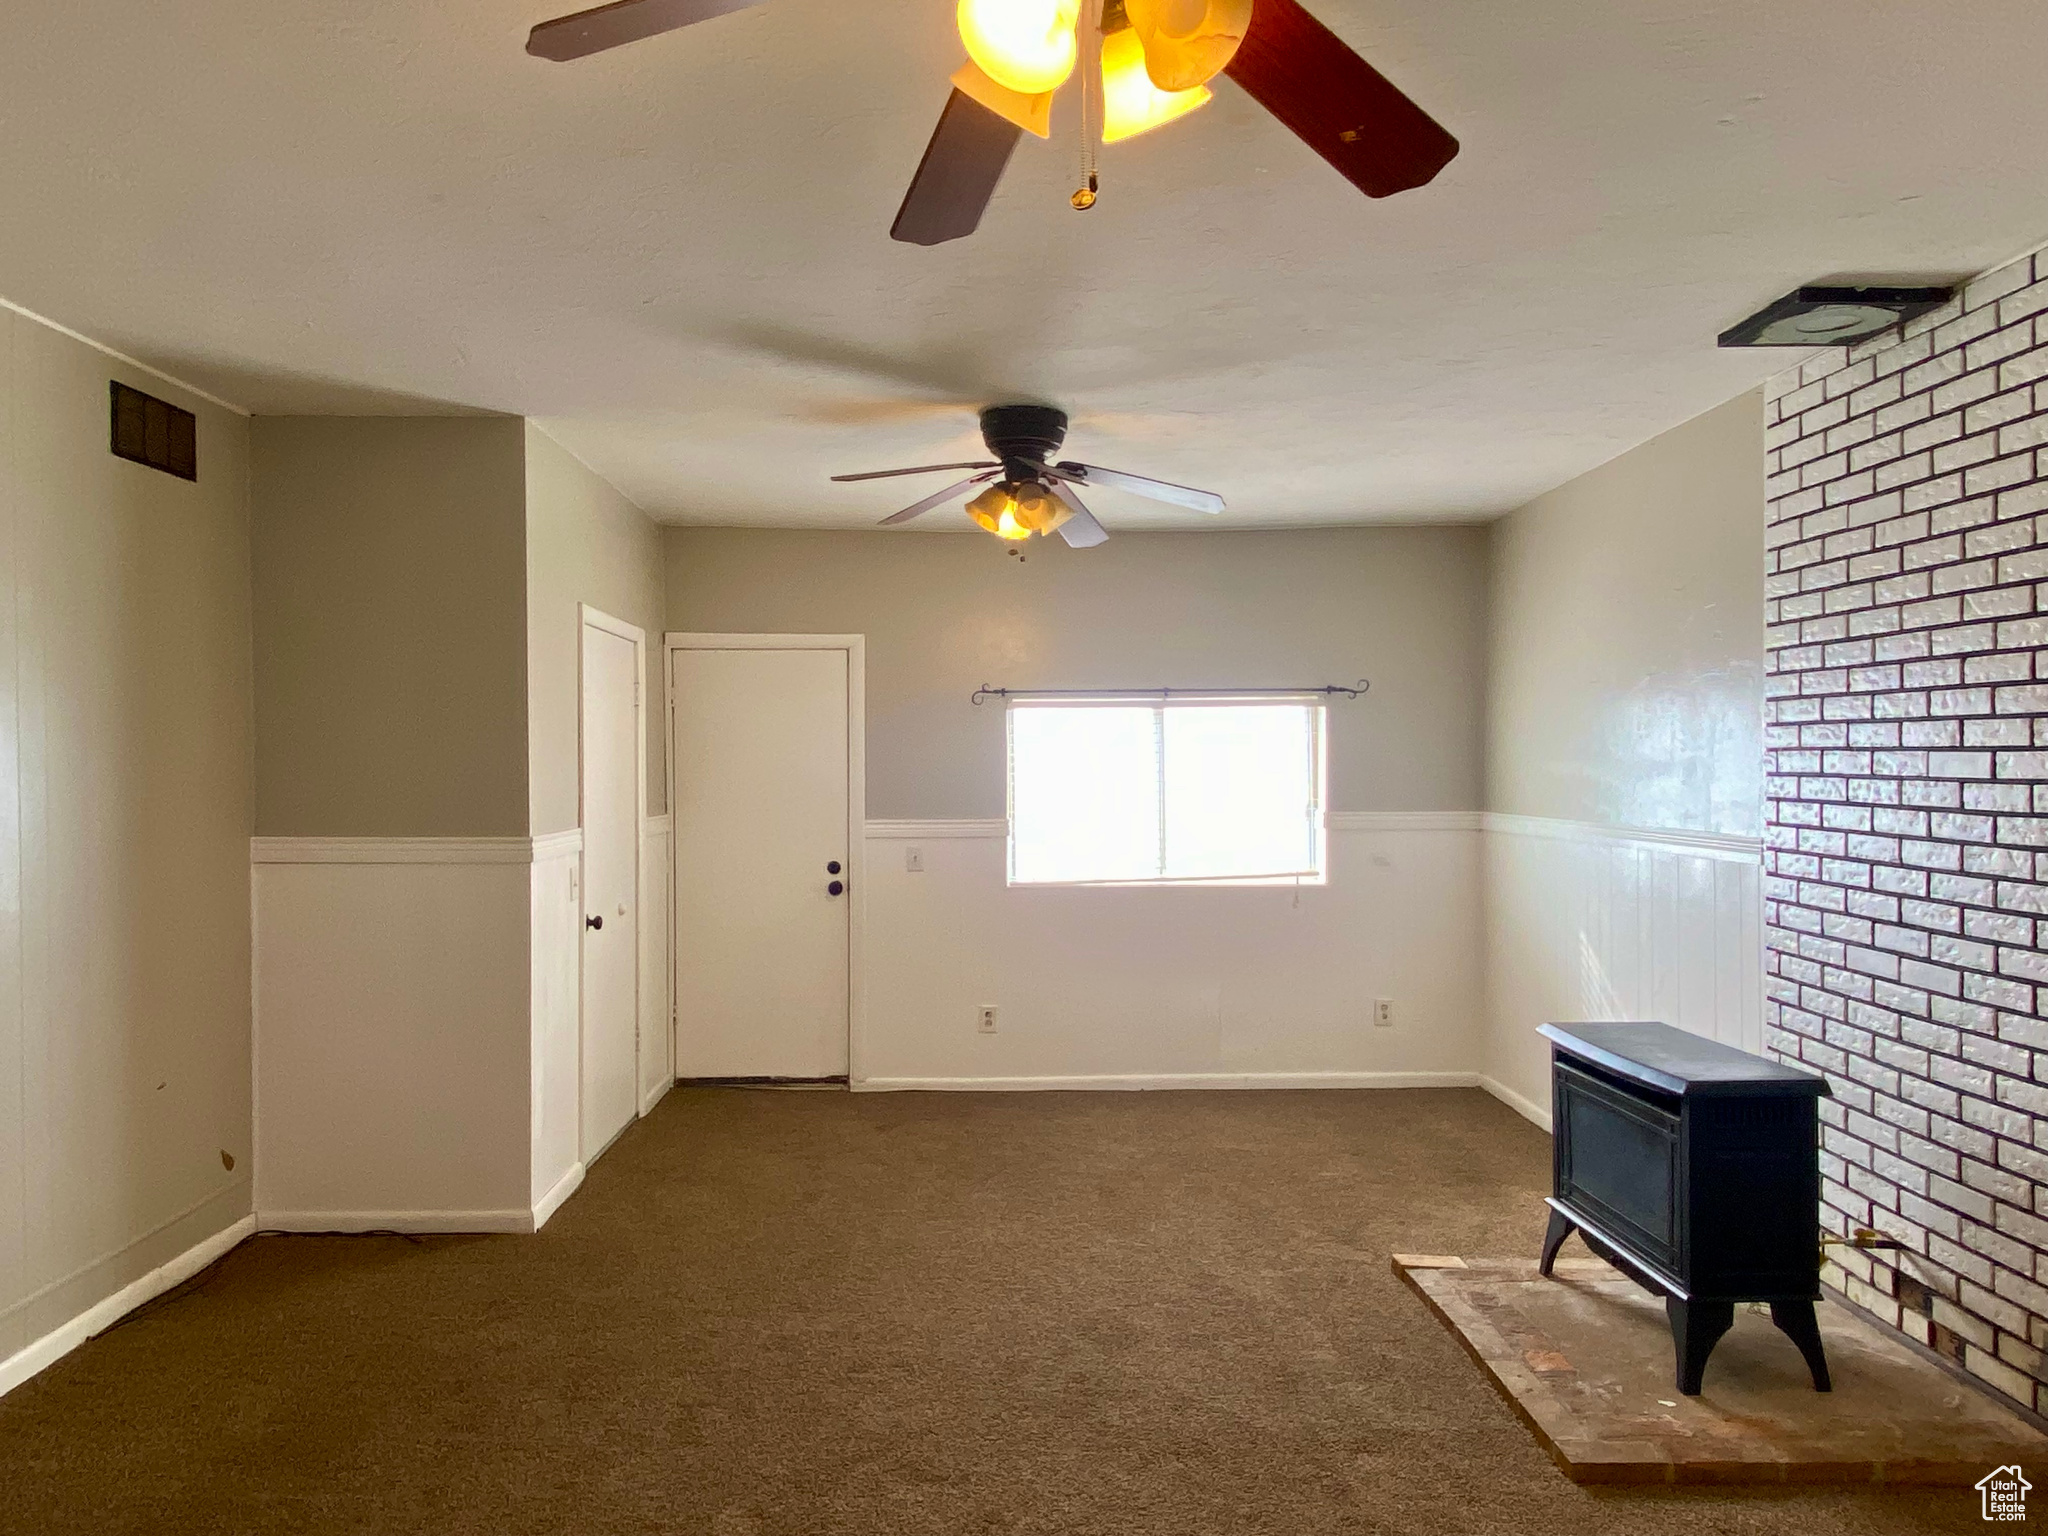 Spare room with brick wall, dark colored carpet, and ceiling fan